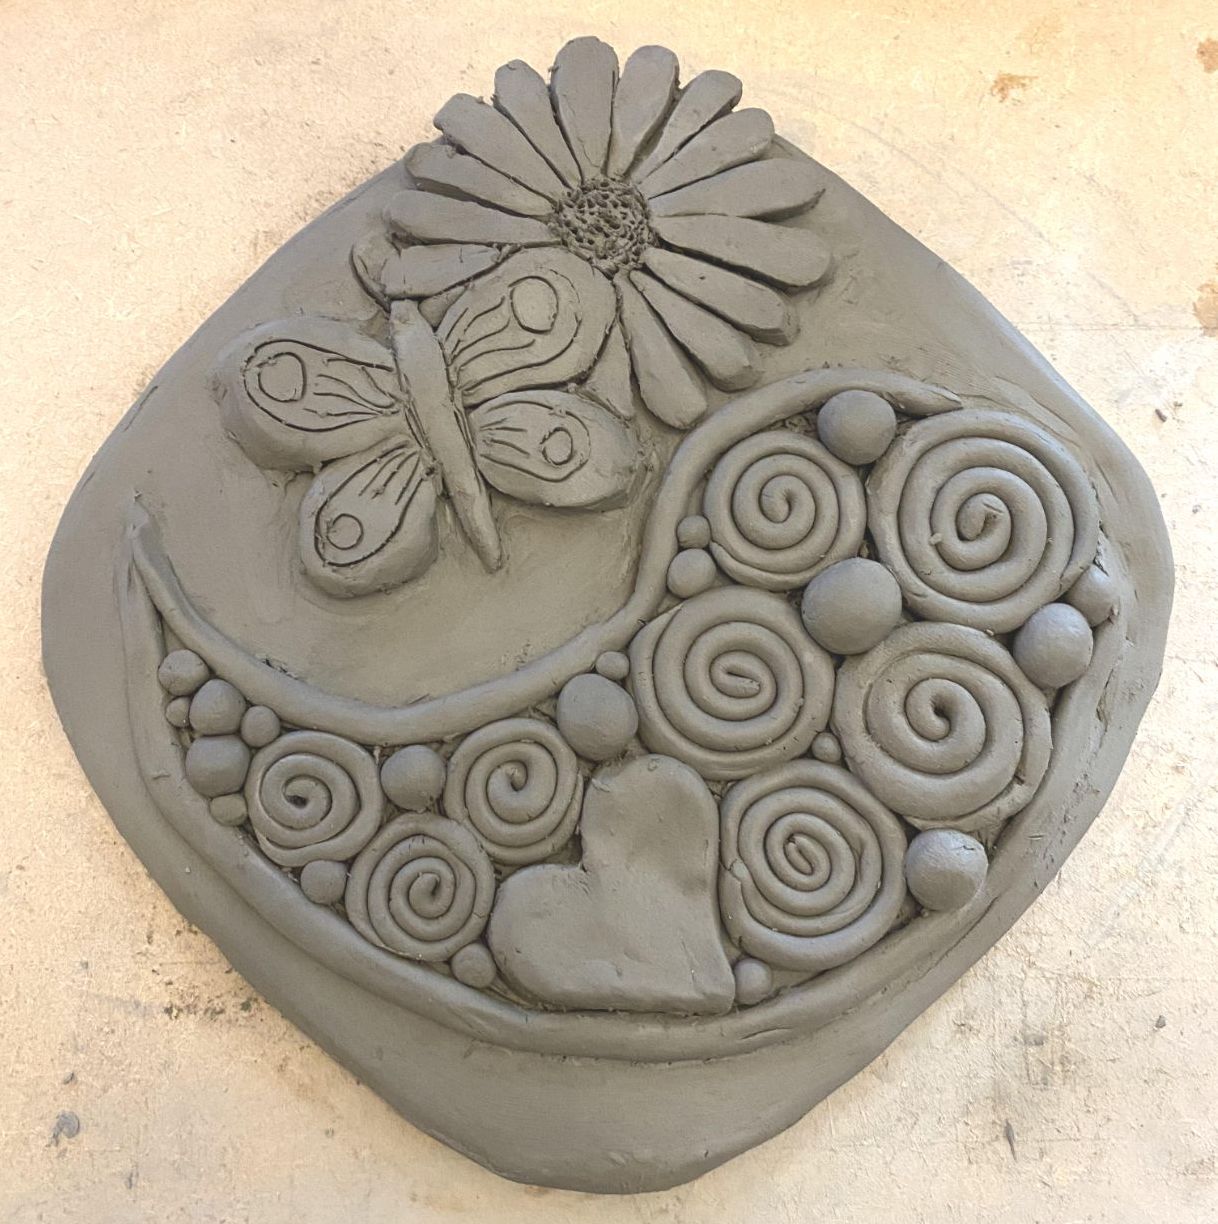 Clay wall hanging created by Rachel Akers